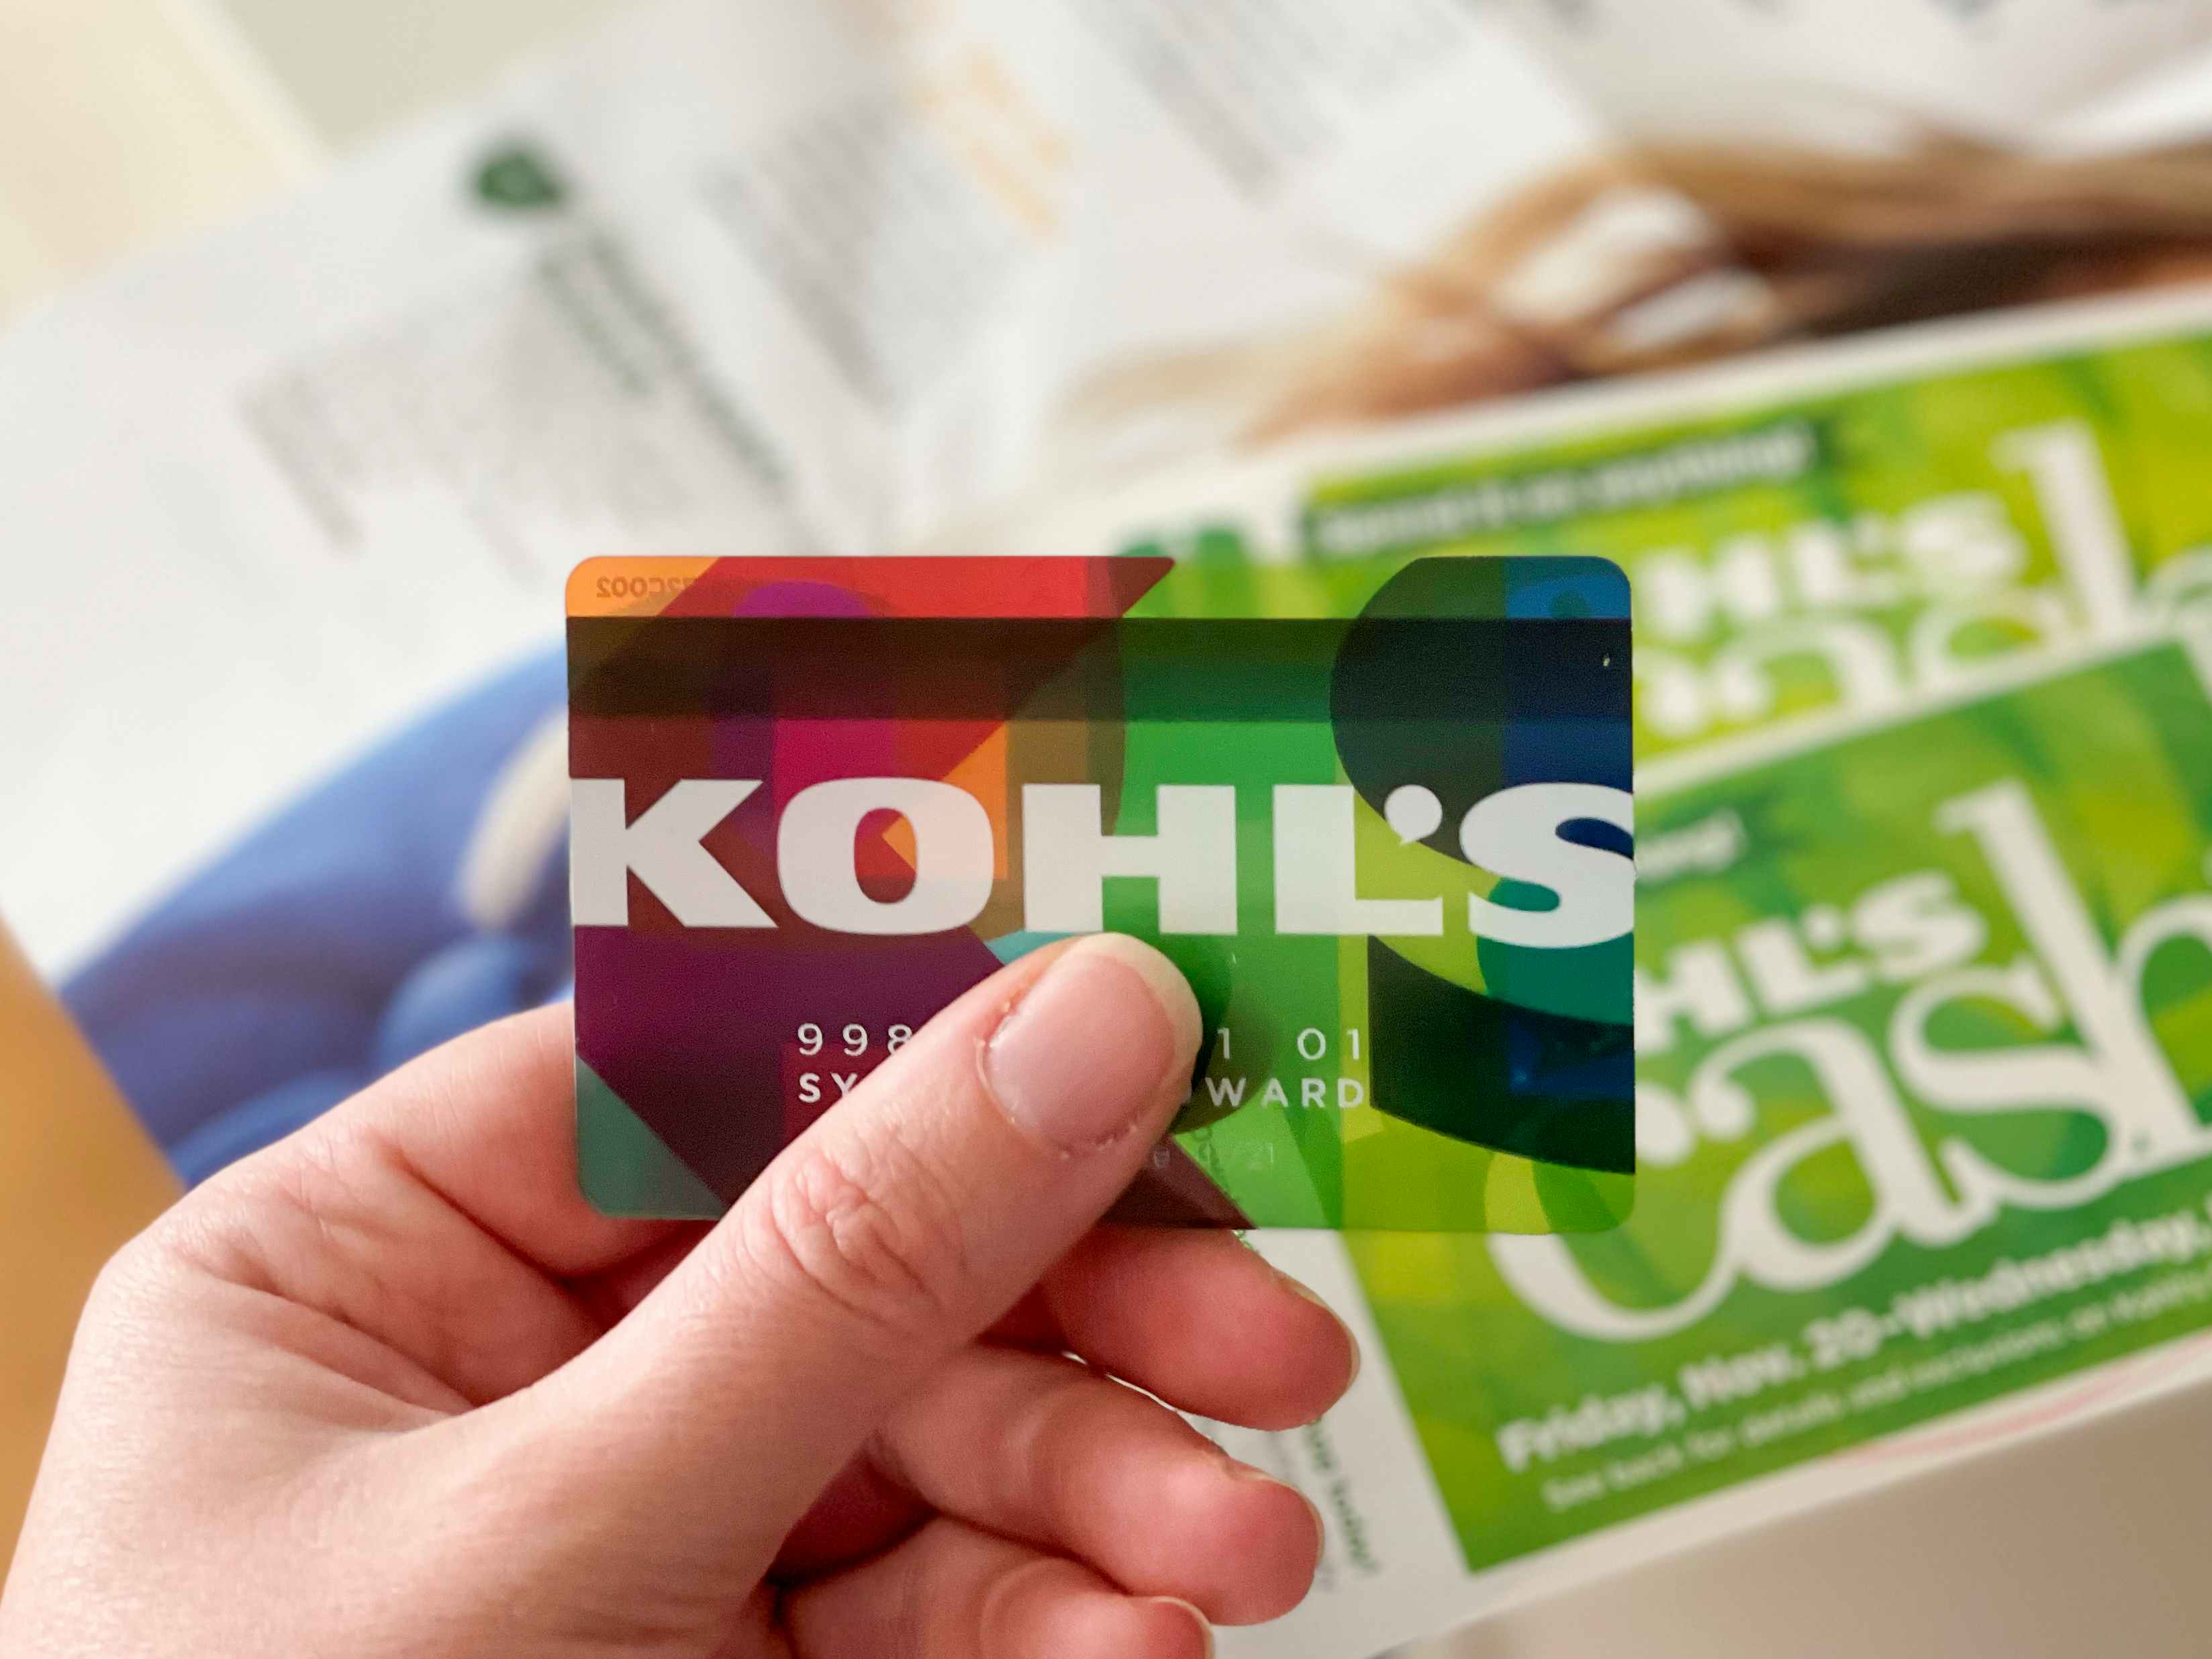 A Guide to Kohl's Coupon Codes: How to Get 30% Off, Free Shipping & More 